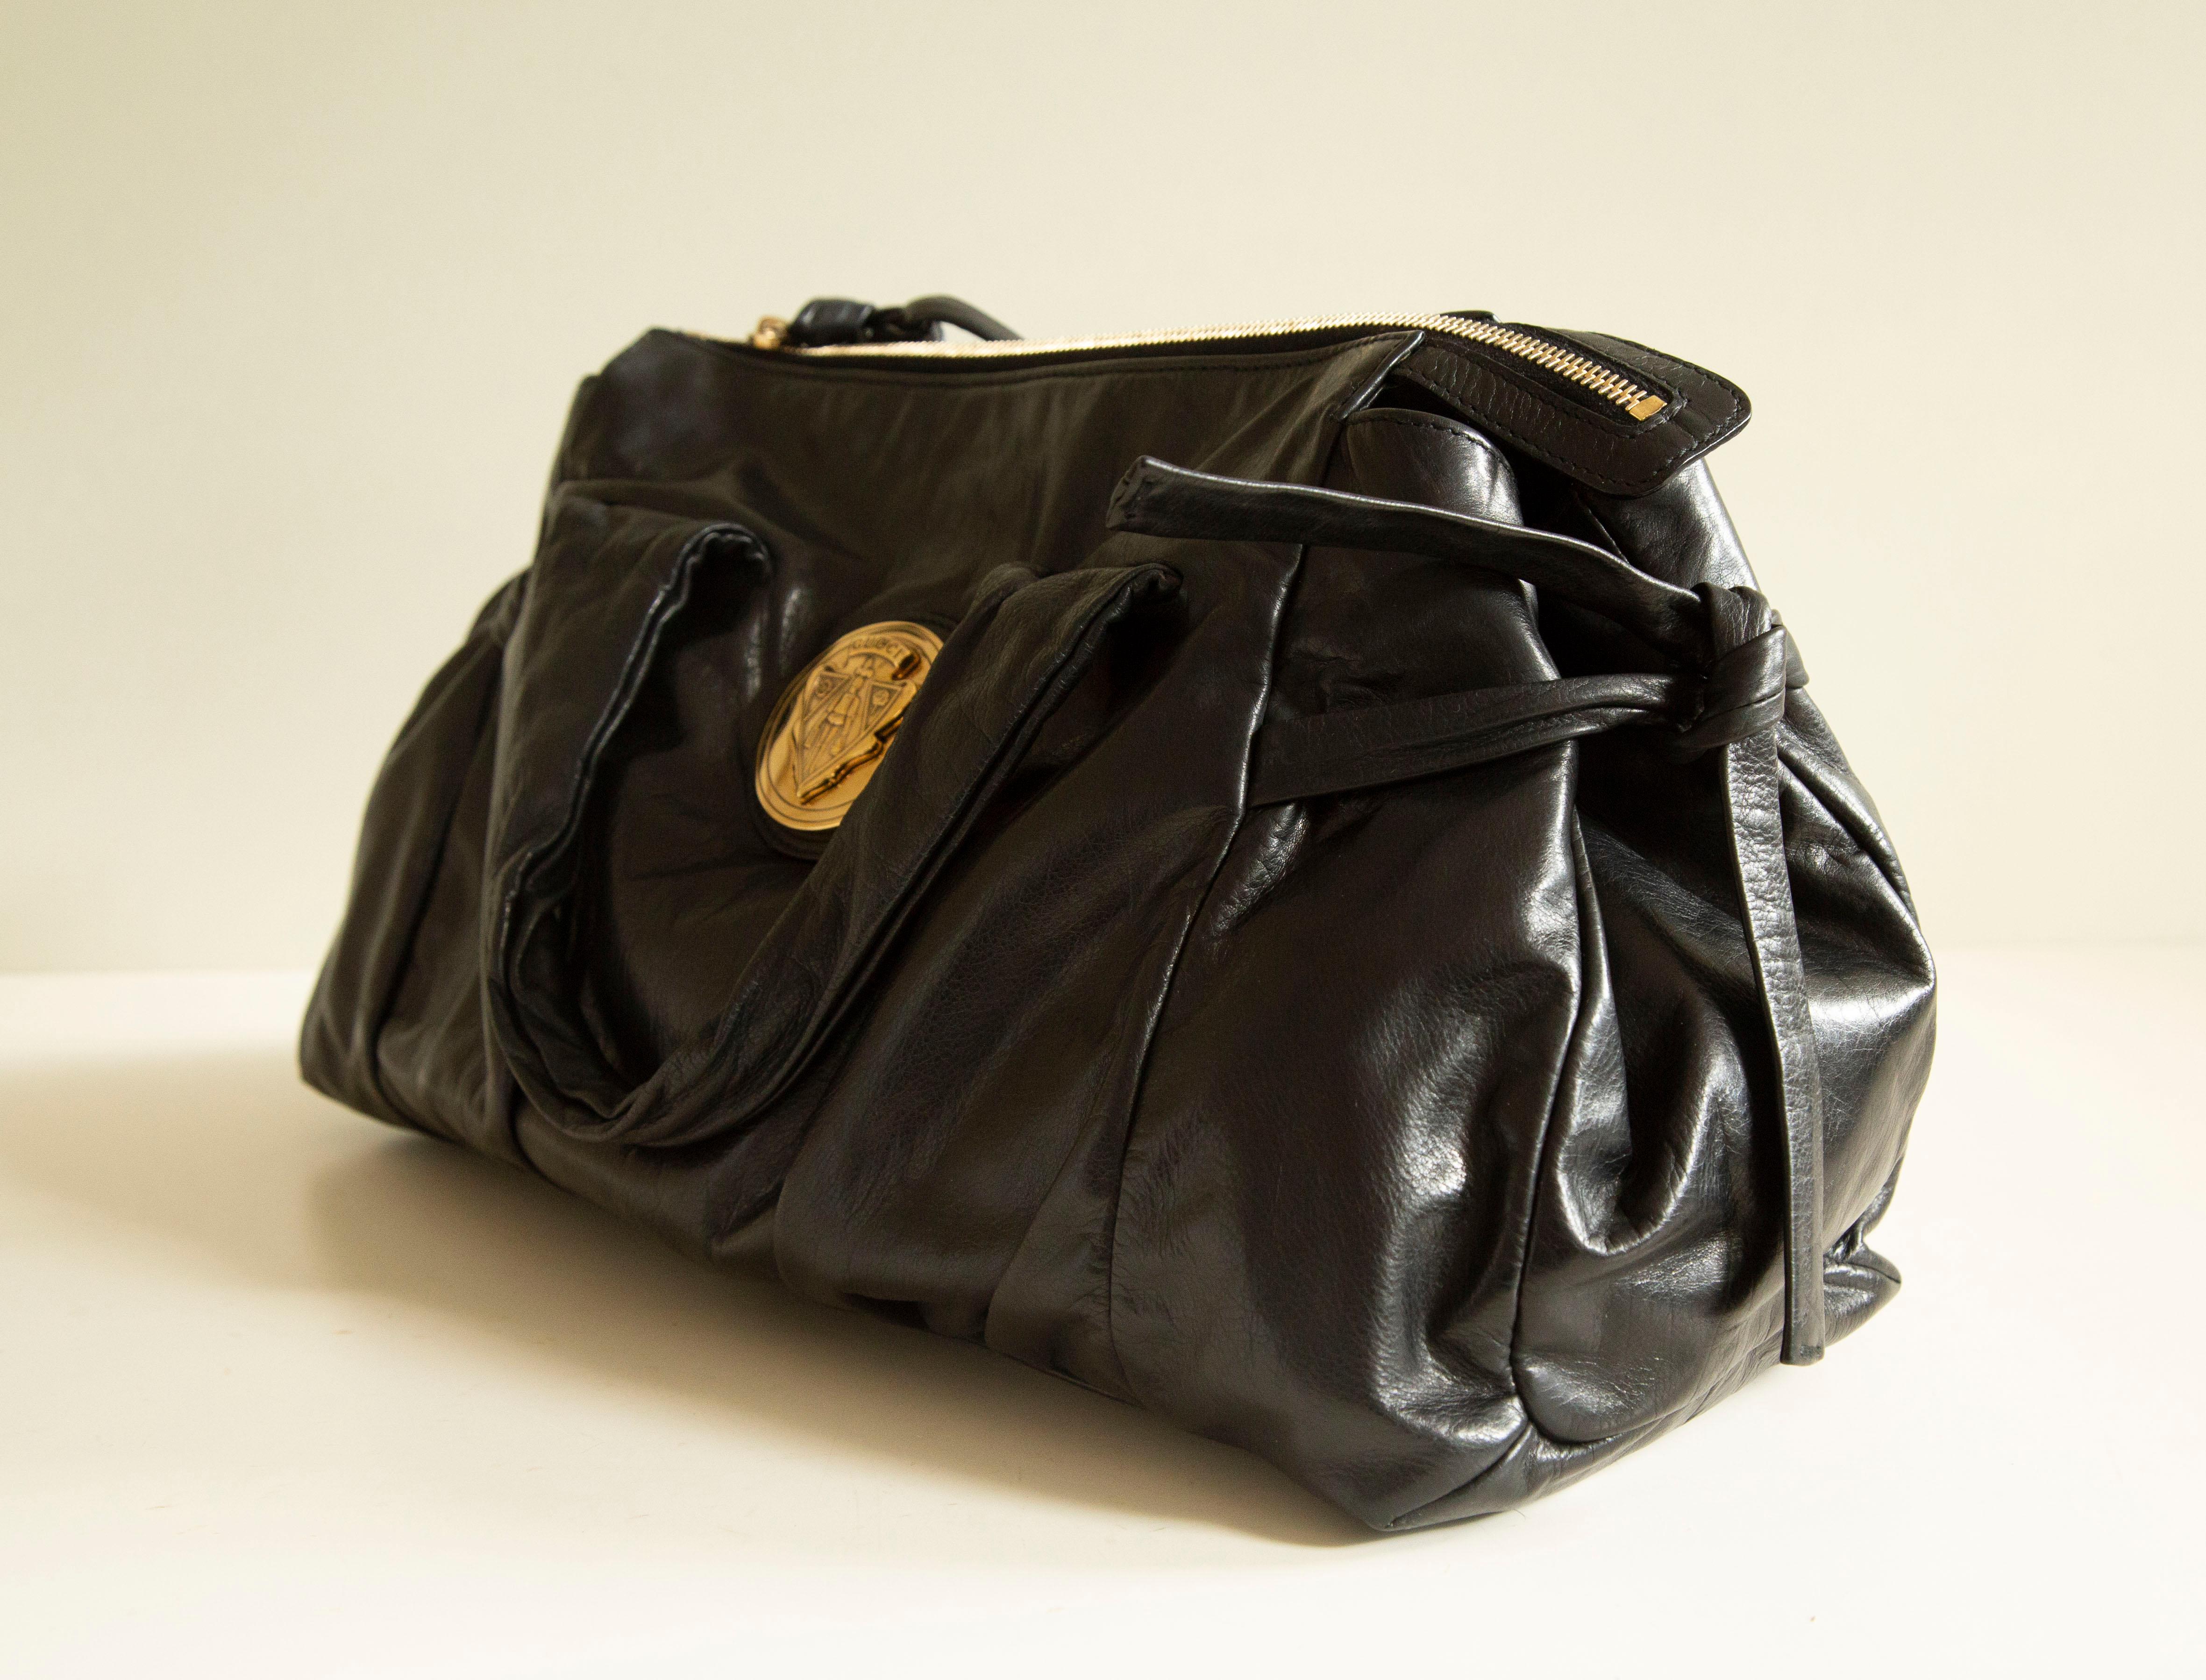 A Gucci Hysteria top handle bag made of soft and shiny black  leather with gold toned hardware. The interior is lined with the Gucci logo synthetic black  fabric. Next to the major compartment,  it features three side pockets of which one has a